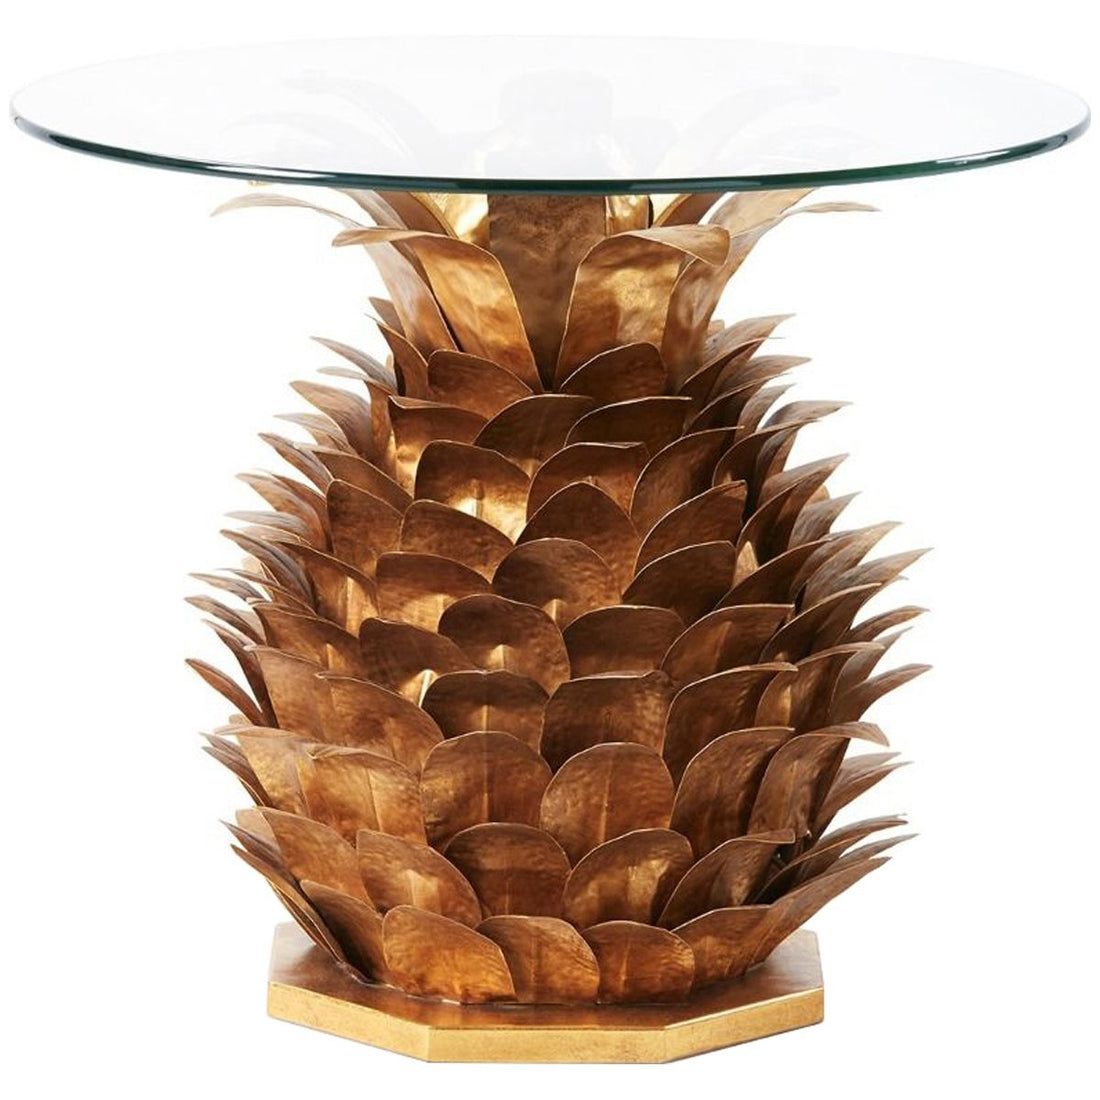 Villa & House Pineapple Side Table, Clear Top